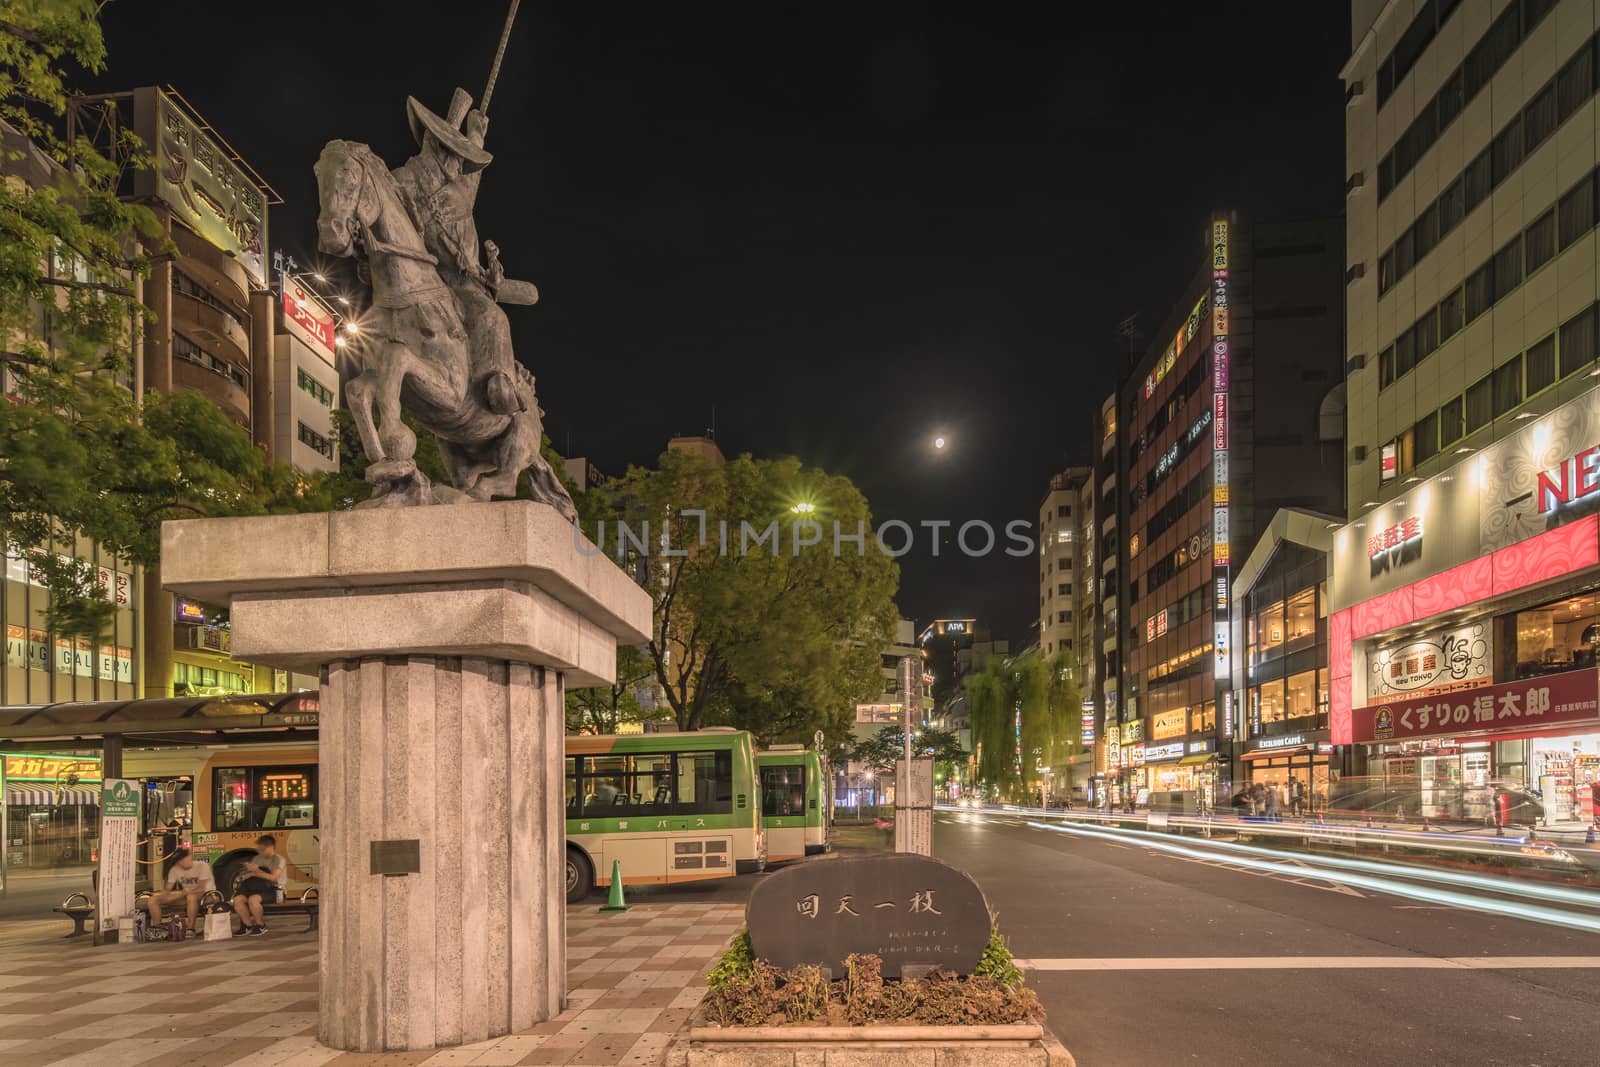 Night view of the square in front of the Nippori train station in the Arakawa district of Tokyo with a statue of a horse ridden by Ota Dokan who was a 15th century Japanese samurai warrior-poet, military tactician and Buddhist monk. Dōkan is best known as the architect and builder of Edo Castle, the actual Imperial Palace.